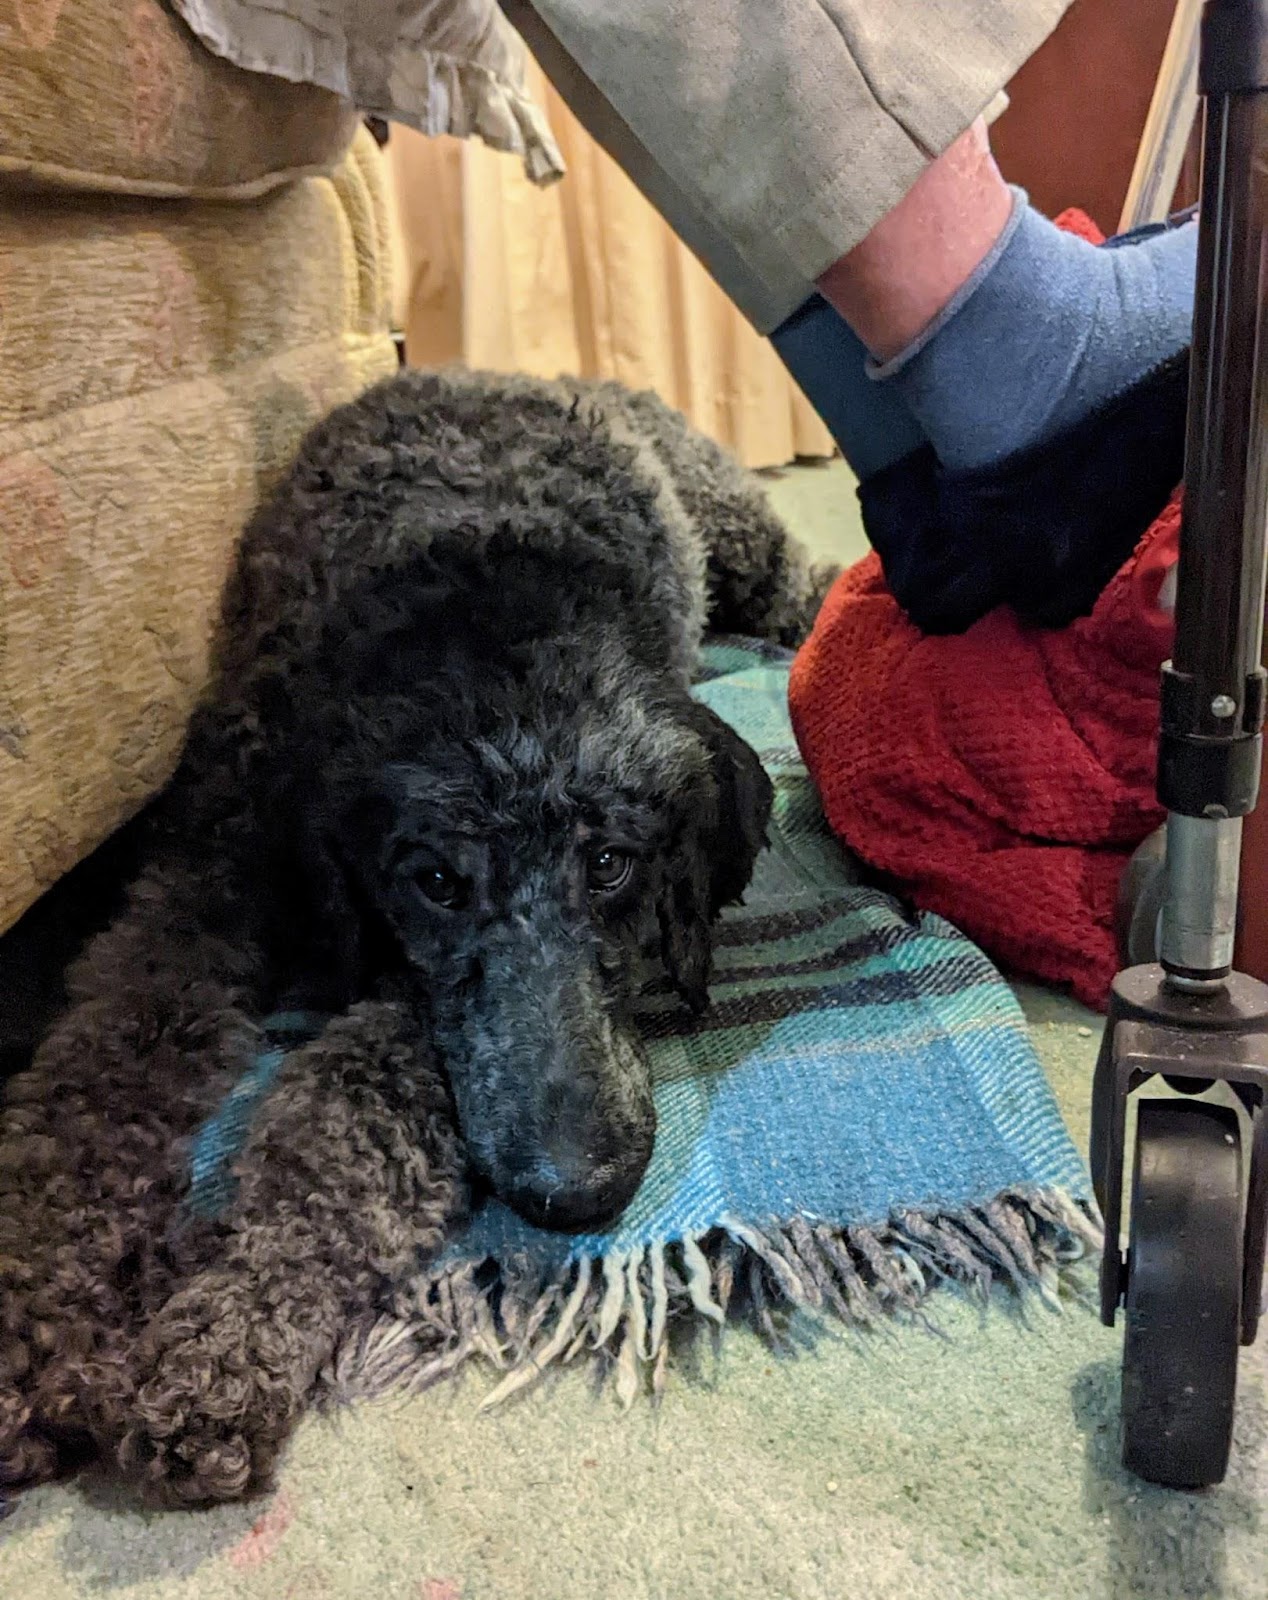 A photo of Dora the black poodle settled on the floor by an armchair under someone's legs